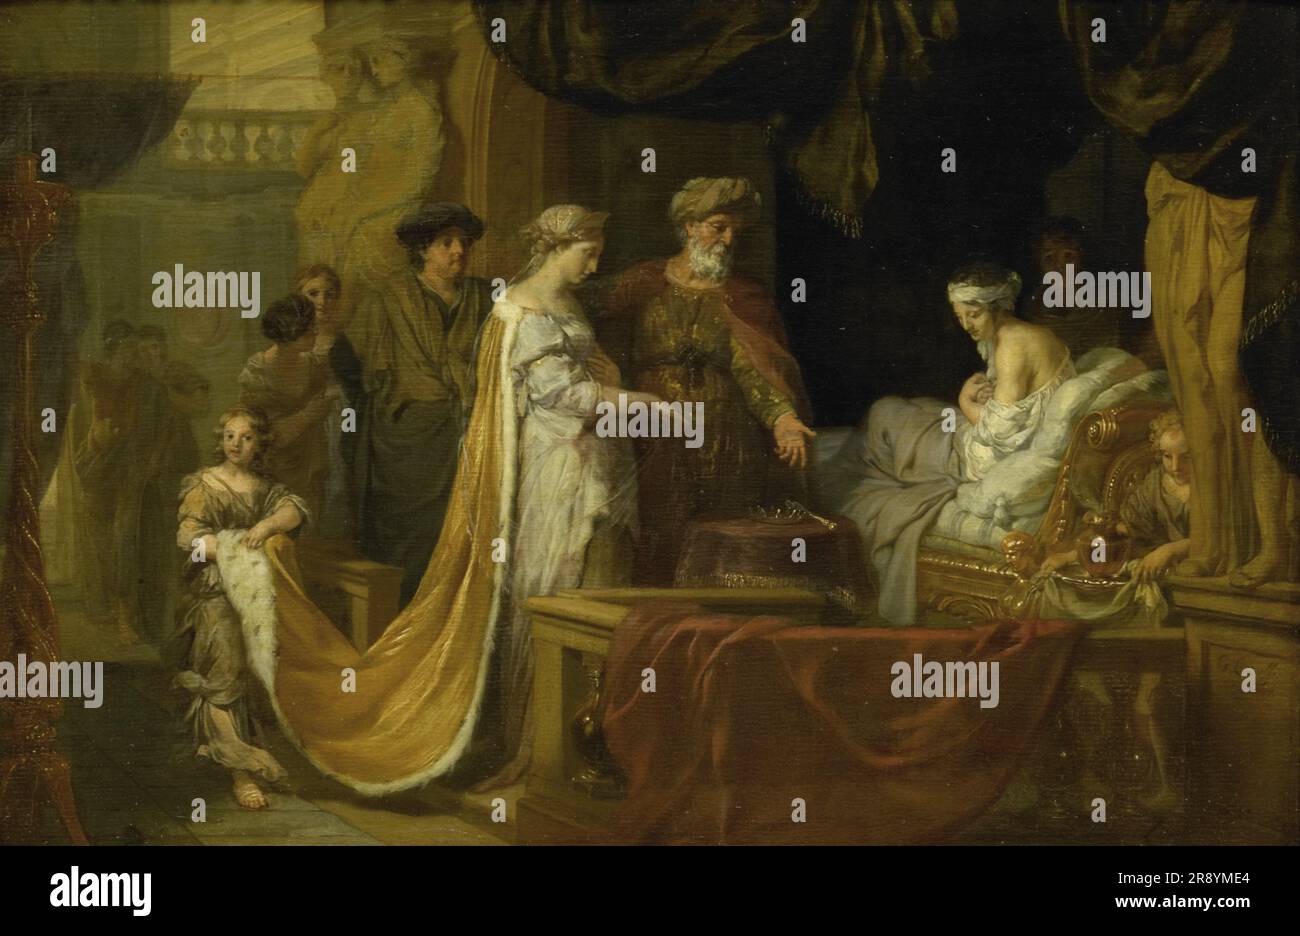 Antiochus and Stratonice, 1671-1675. By taking Antiochus' pulse when Stratonice enters the room, the physician discovers that the love for his stepmother is the cause of Antiochus' illness. (King Seleucus subsequently hands his kingdom and his wife over to his son). Stock Photo